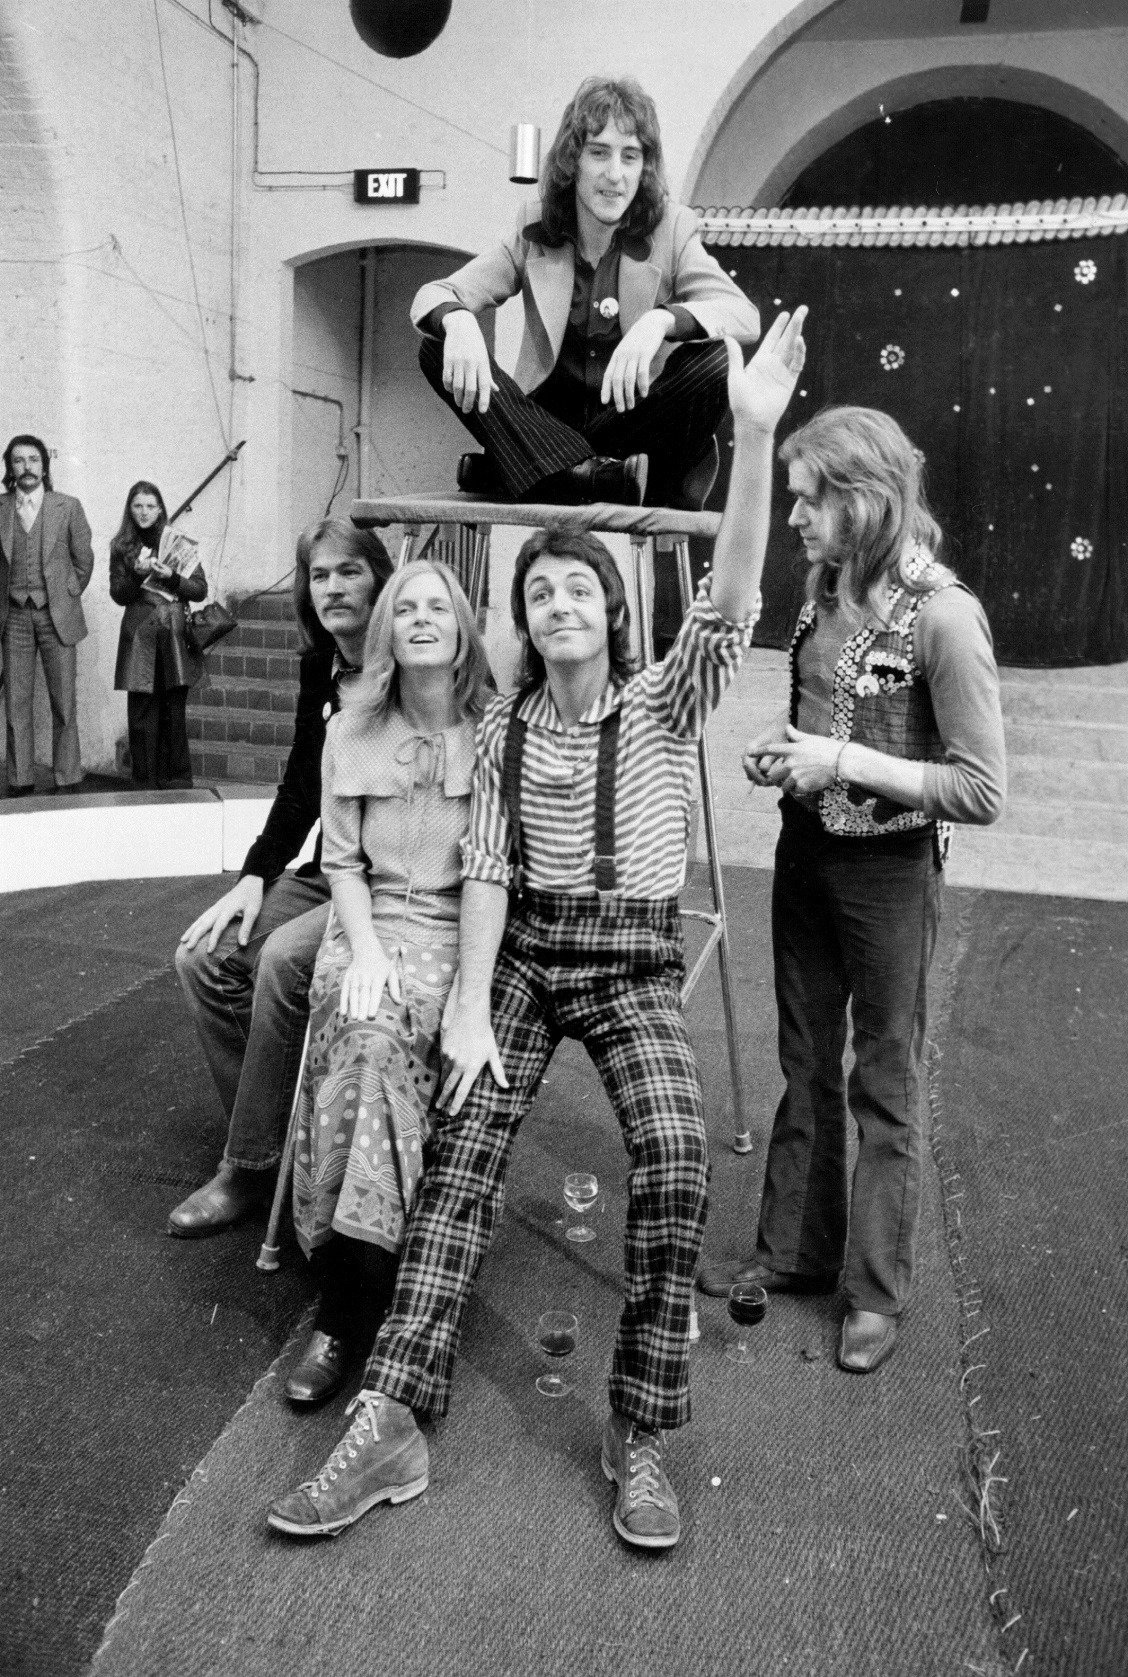 Paul McCartney with his wife Linda and their pop group Wings.